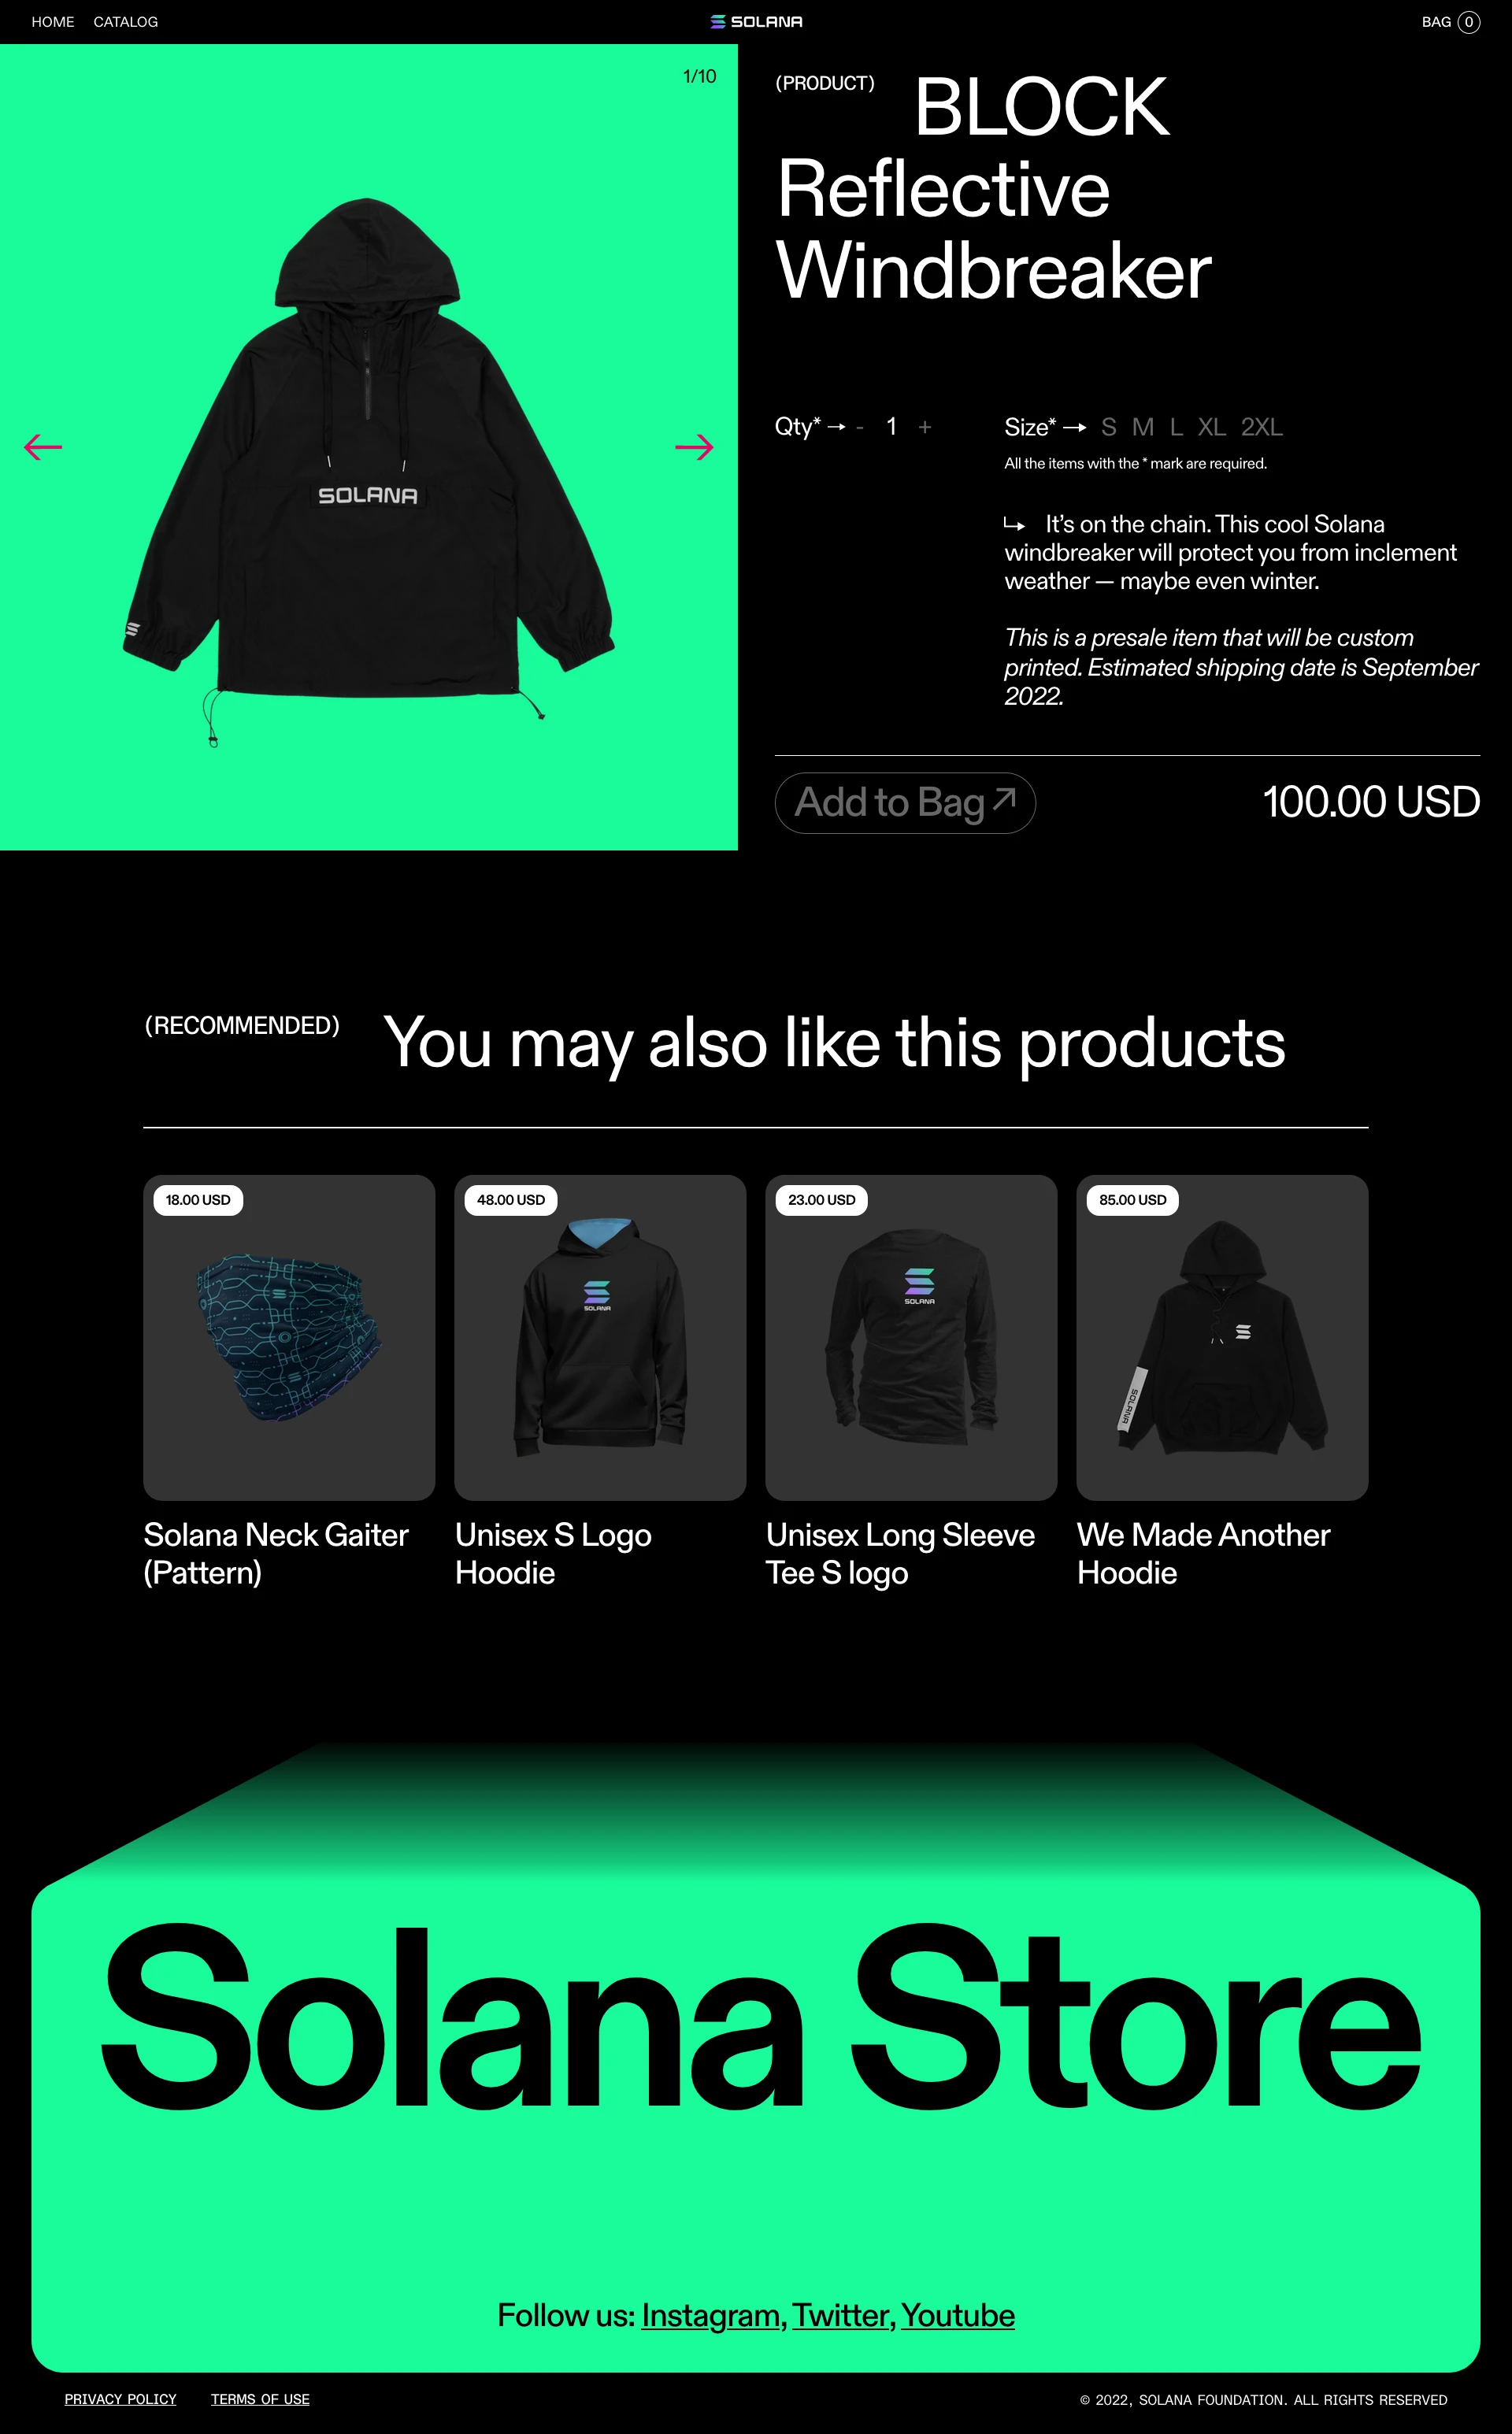 Solana Store Landing Page Example: Show your Solana pride. Get high-quality swag directly from the Solana Foundation.